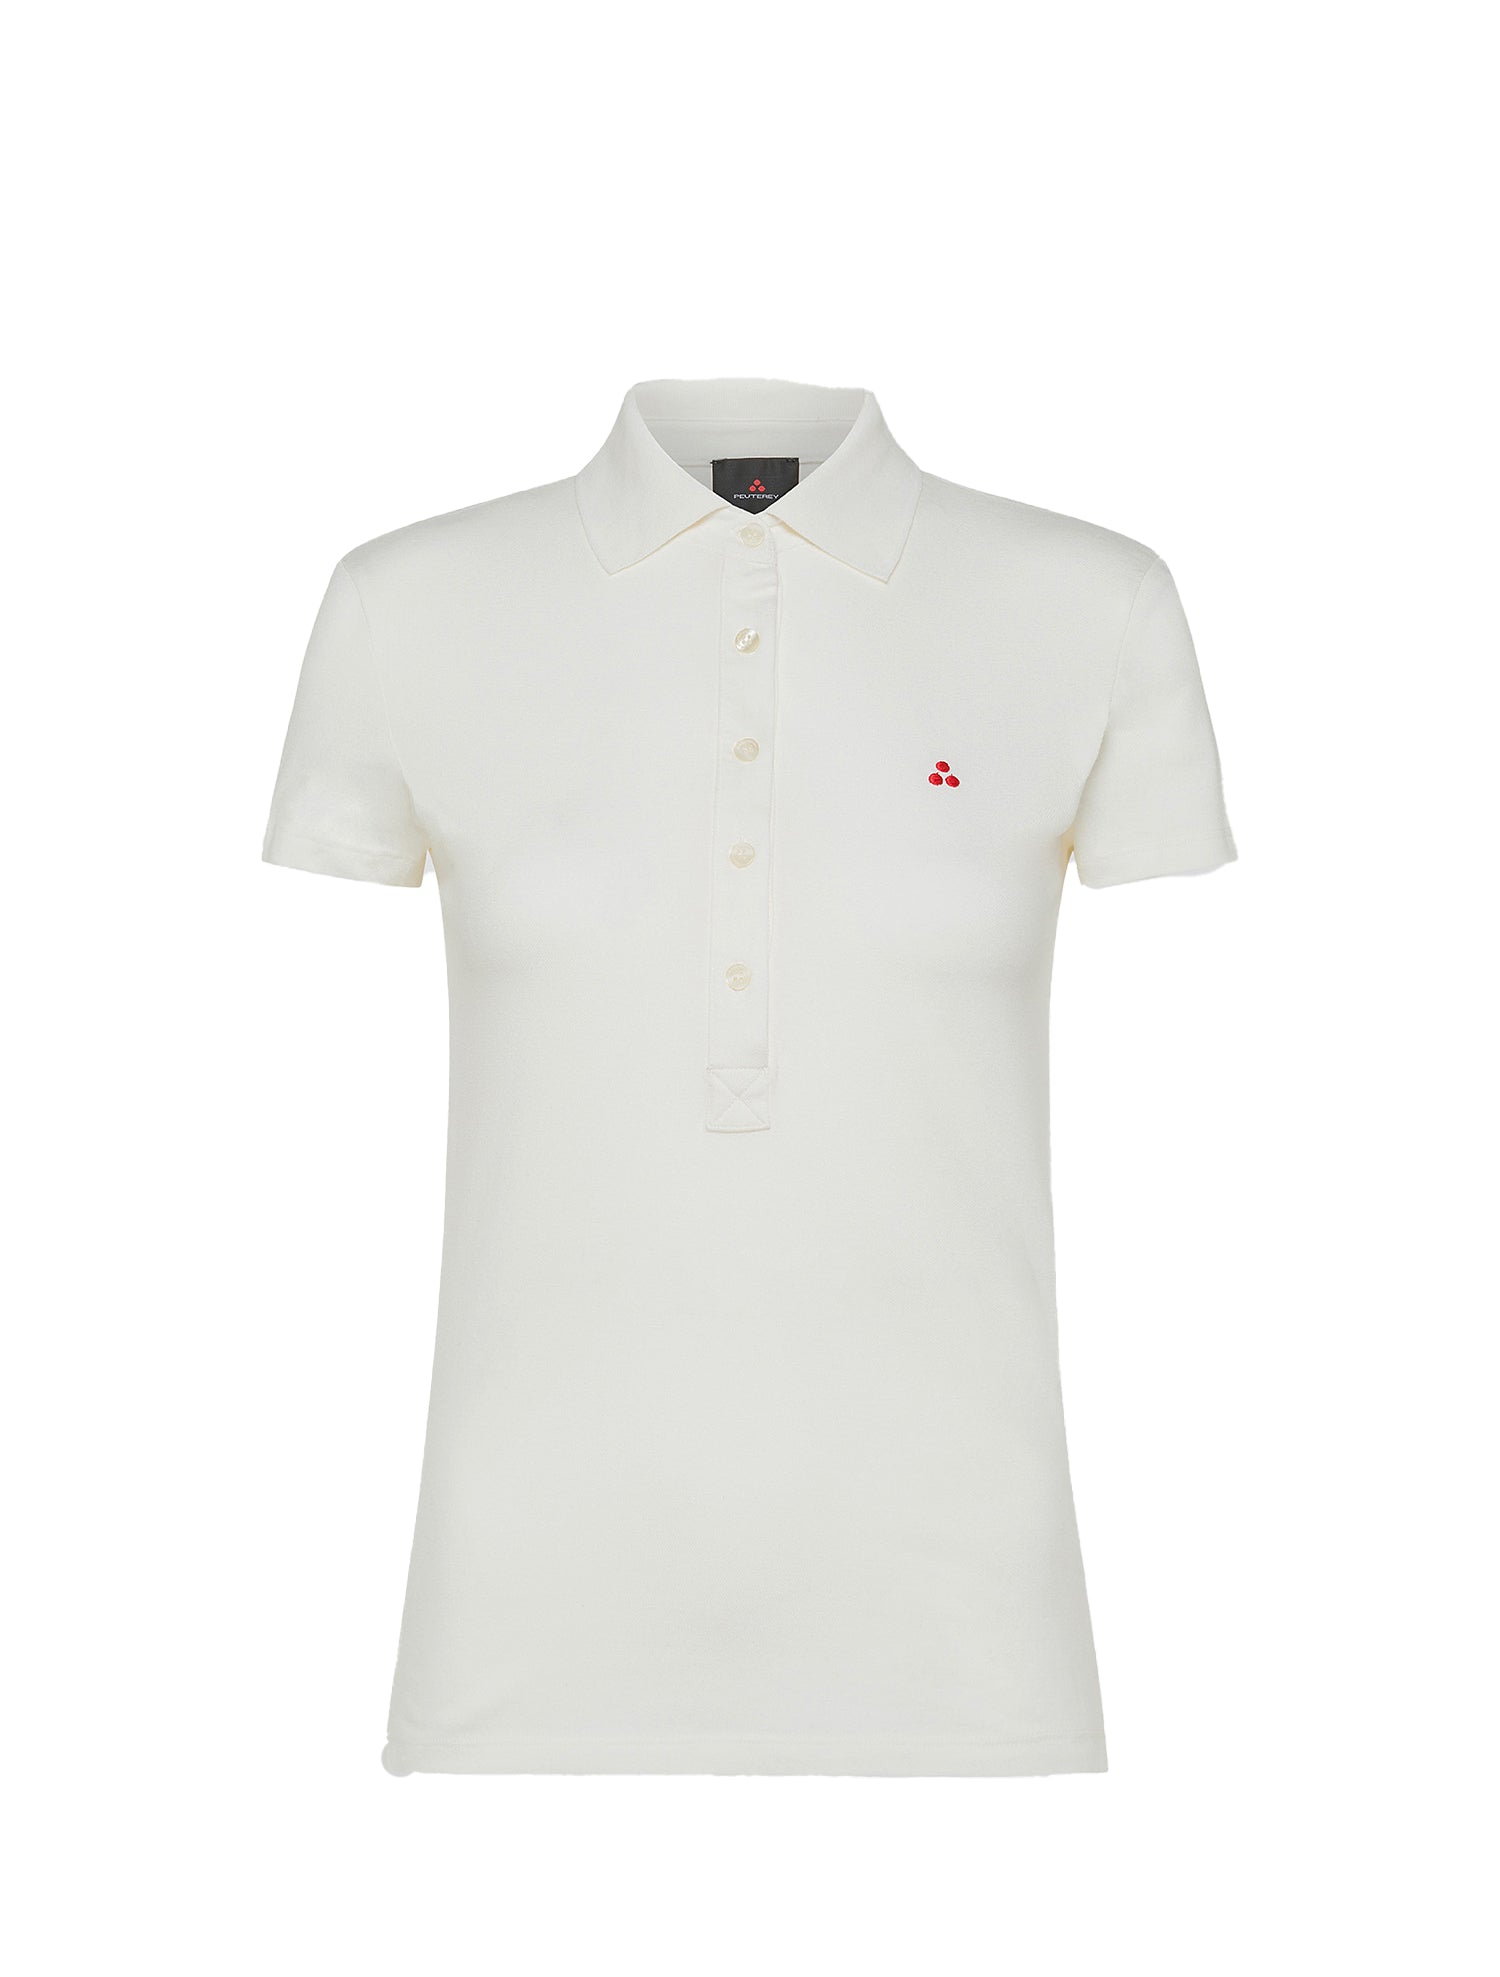 Peutery 3 Buttons White Polo Shirt for Women